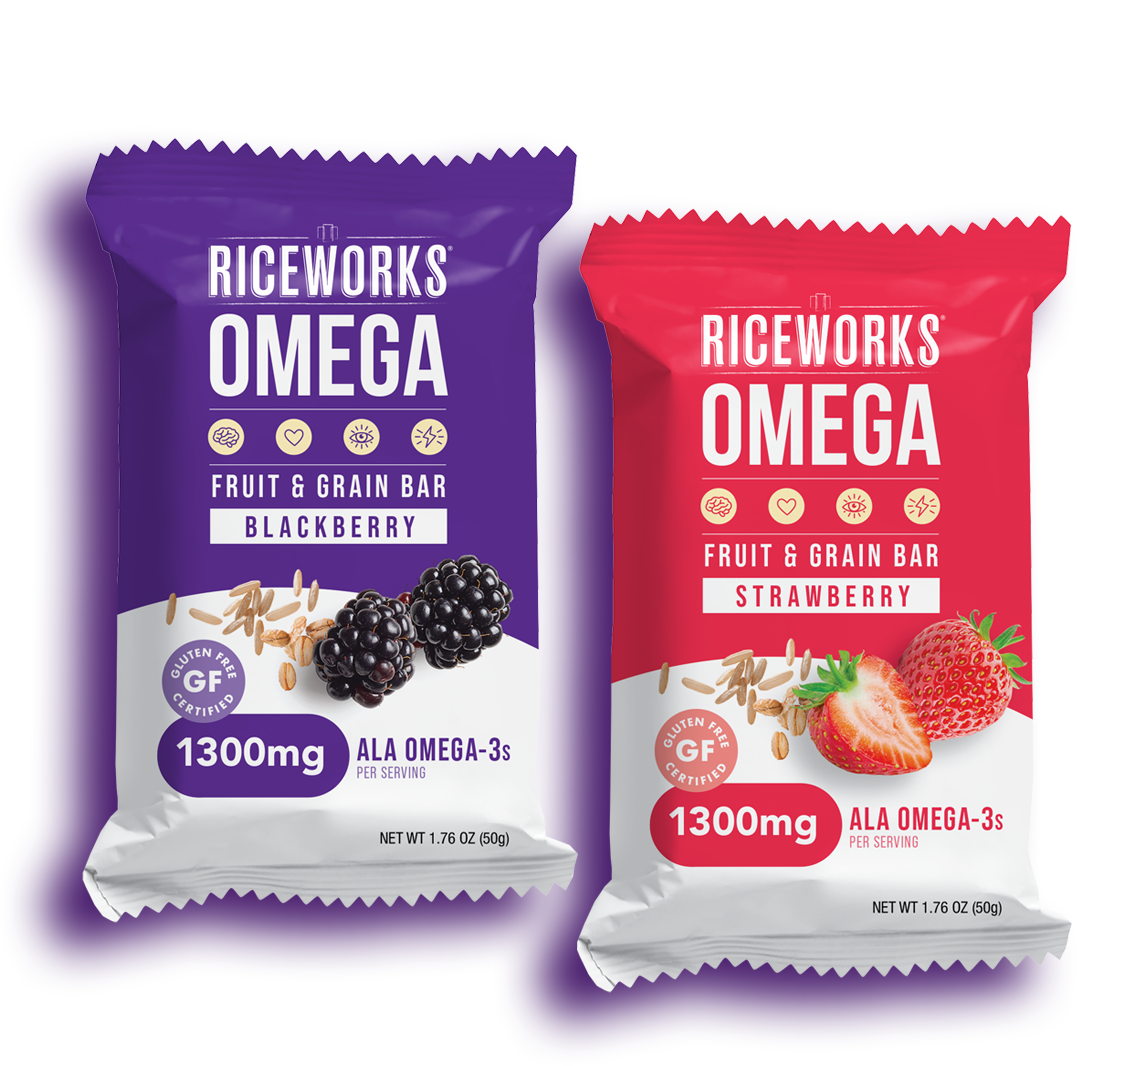 Fruity Nutritious Deliciousness - Riceworks Omega Fruit and Grain Bars